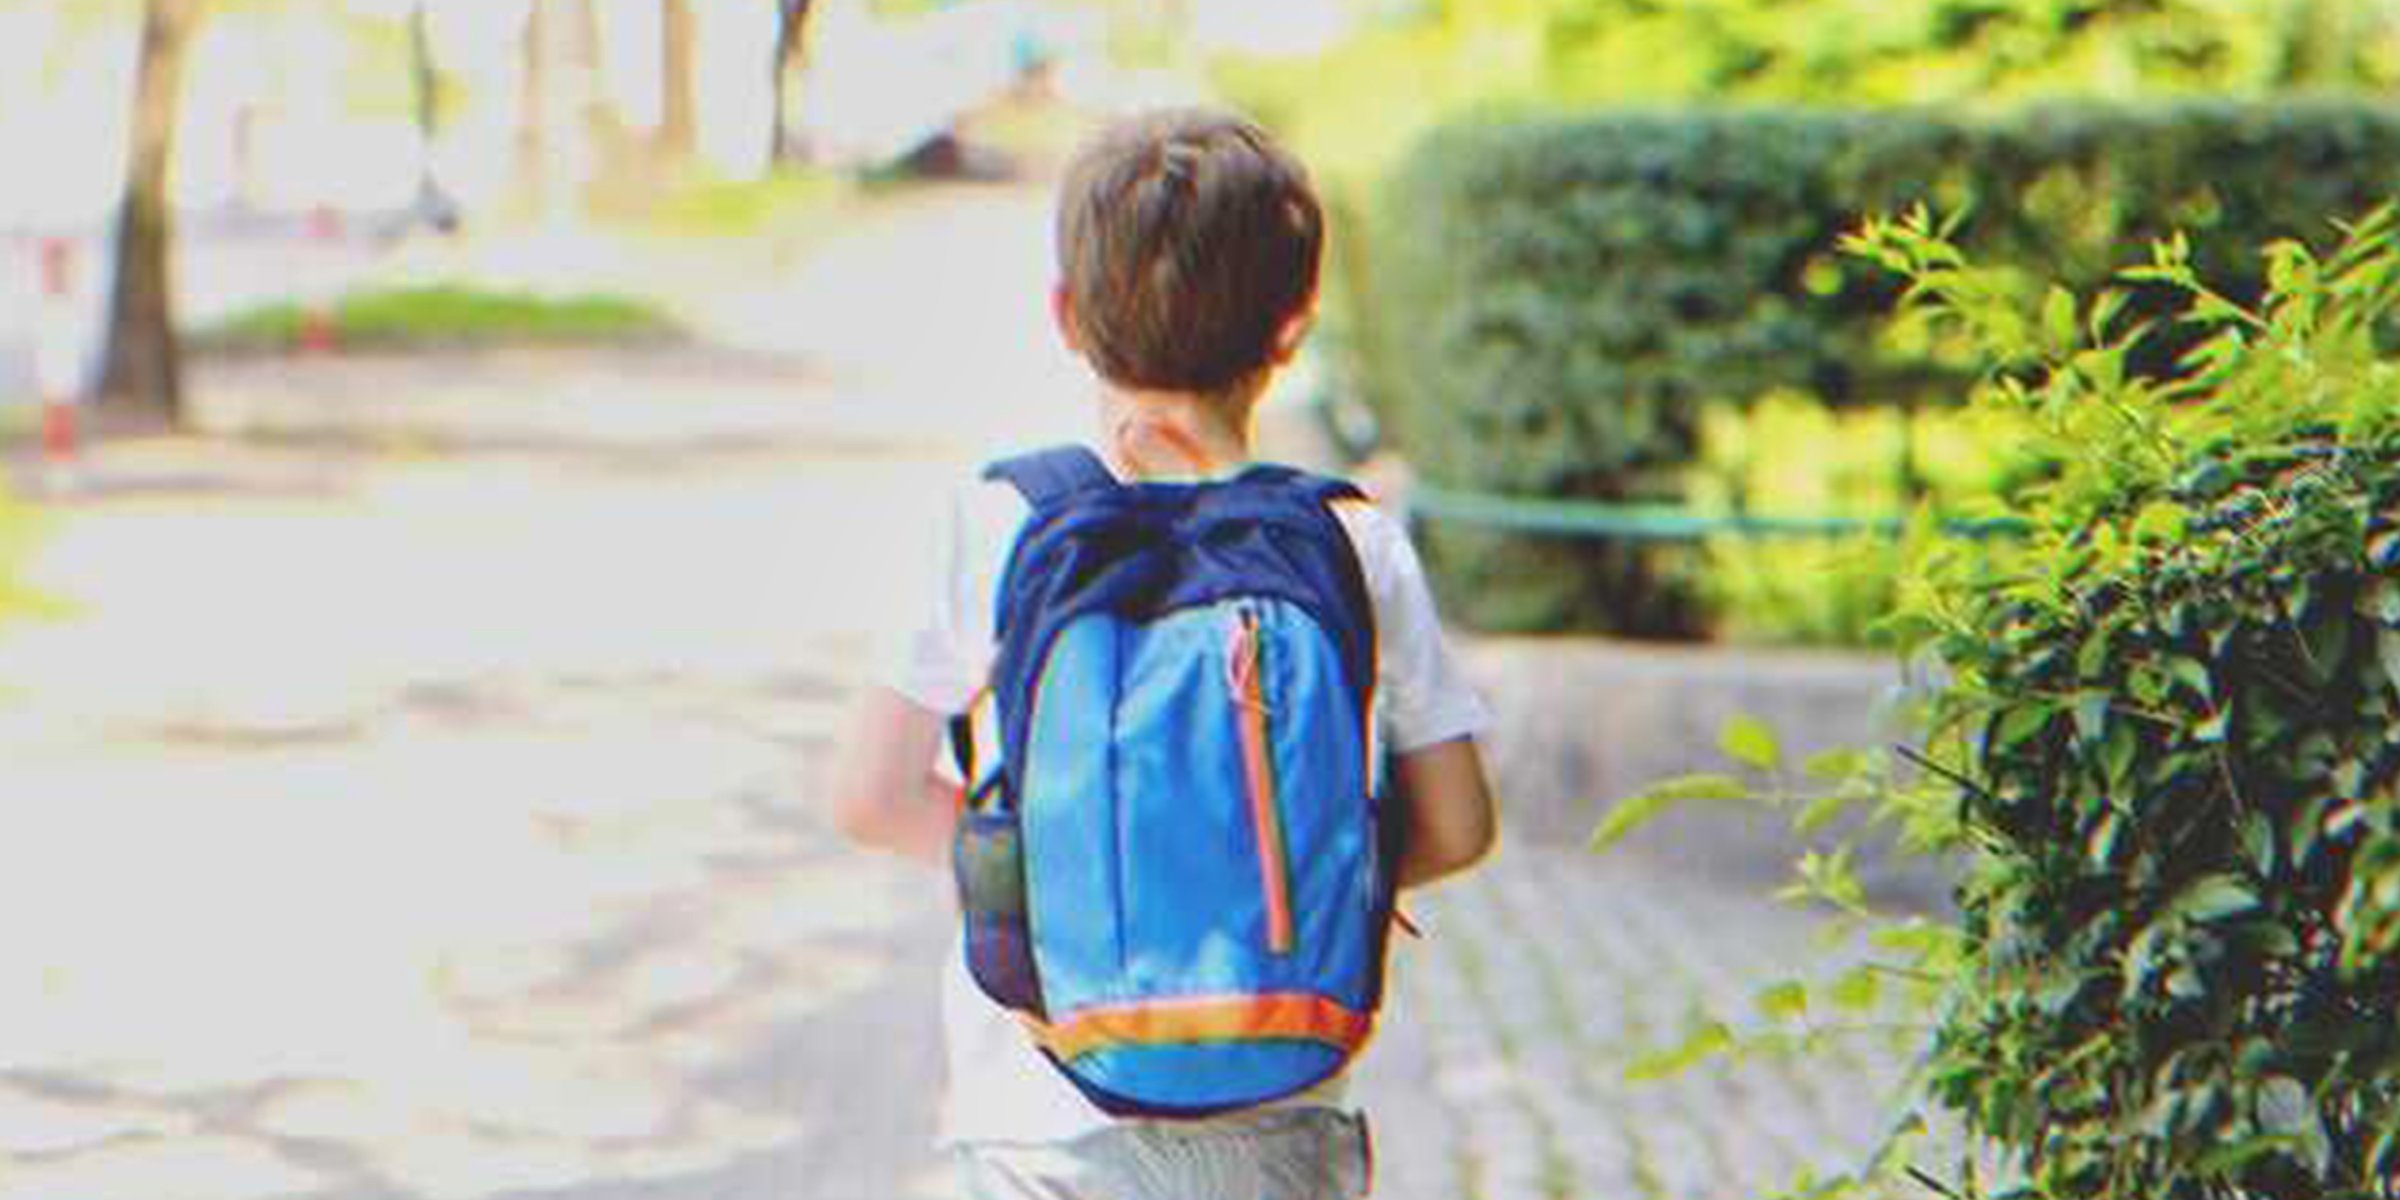 A kid with a backpack walking down the street | Source: Shutterstock